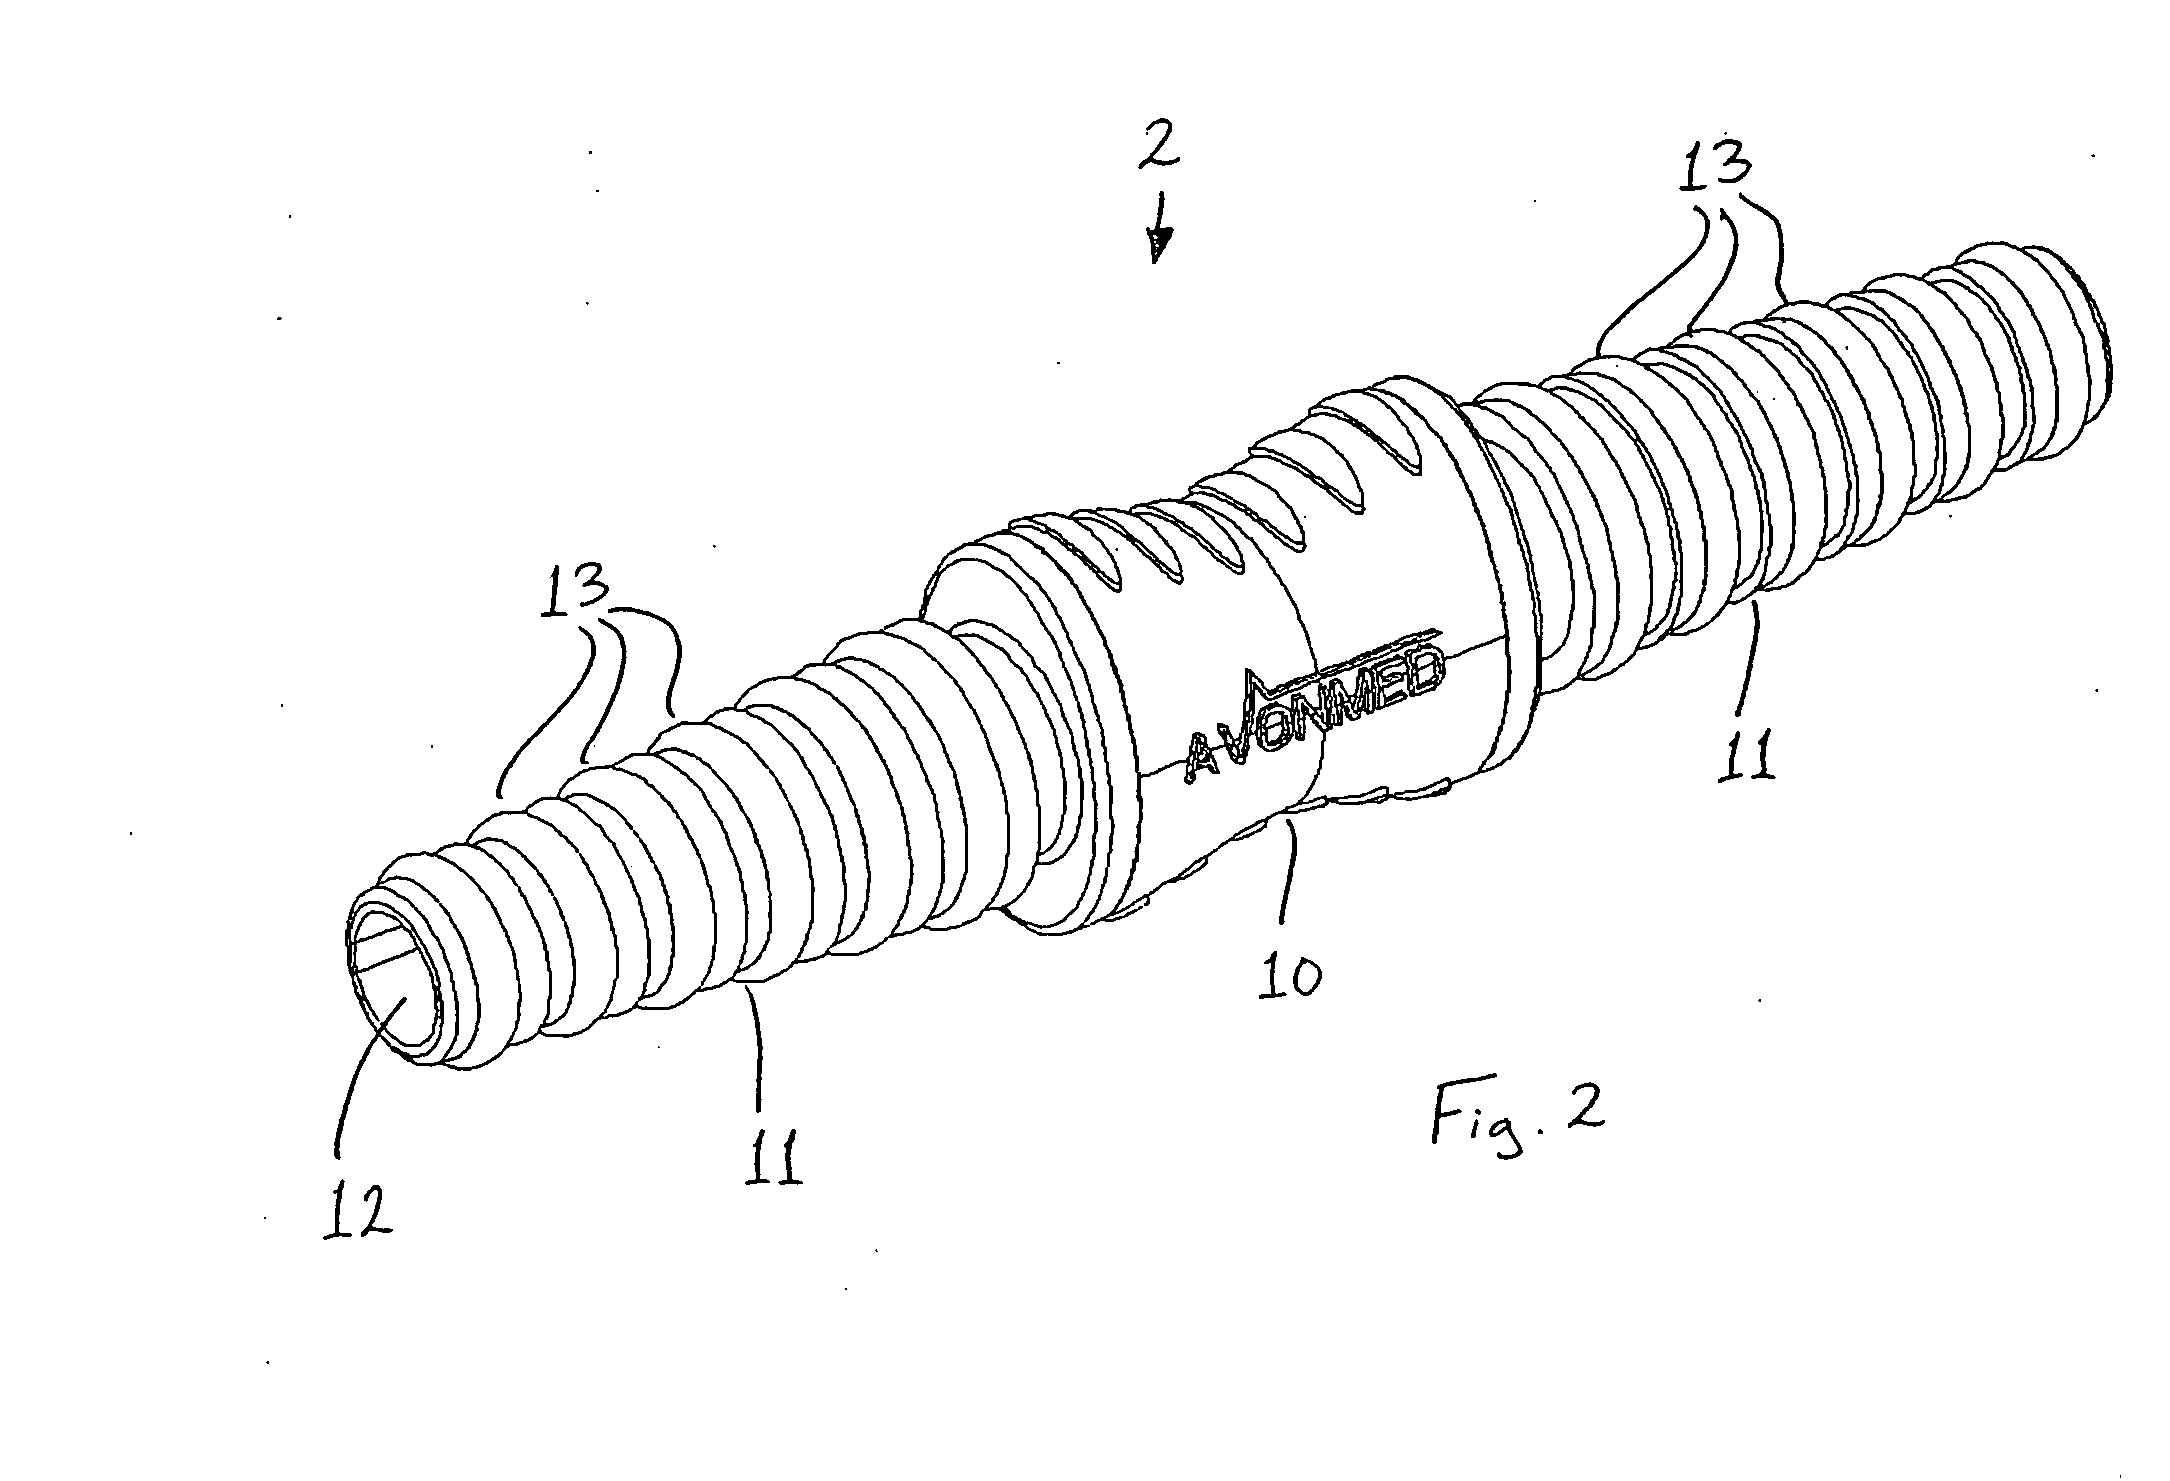 Device suitable for connection to a substantially tubular element